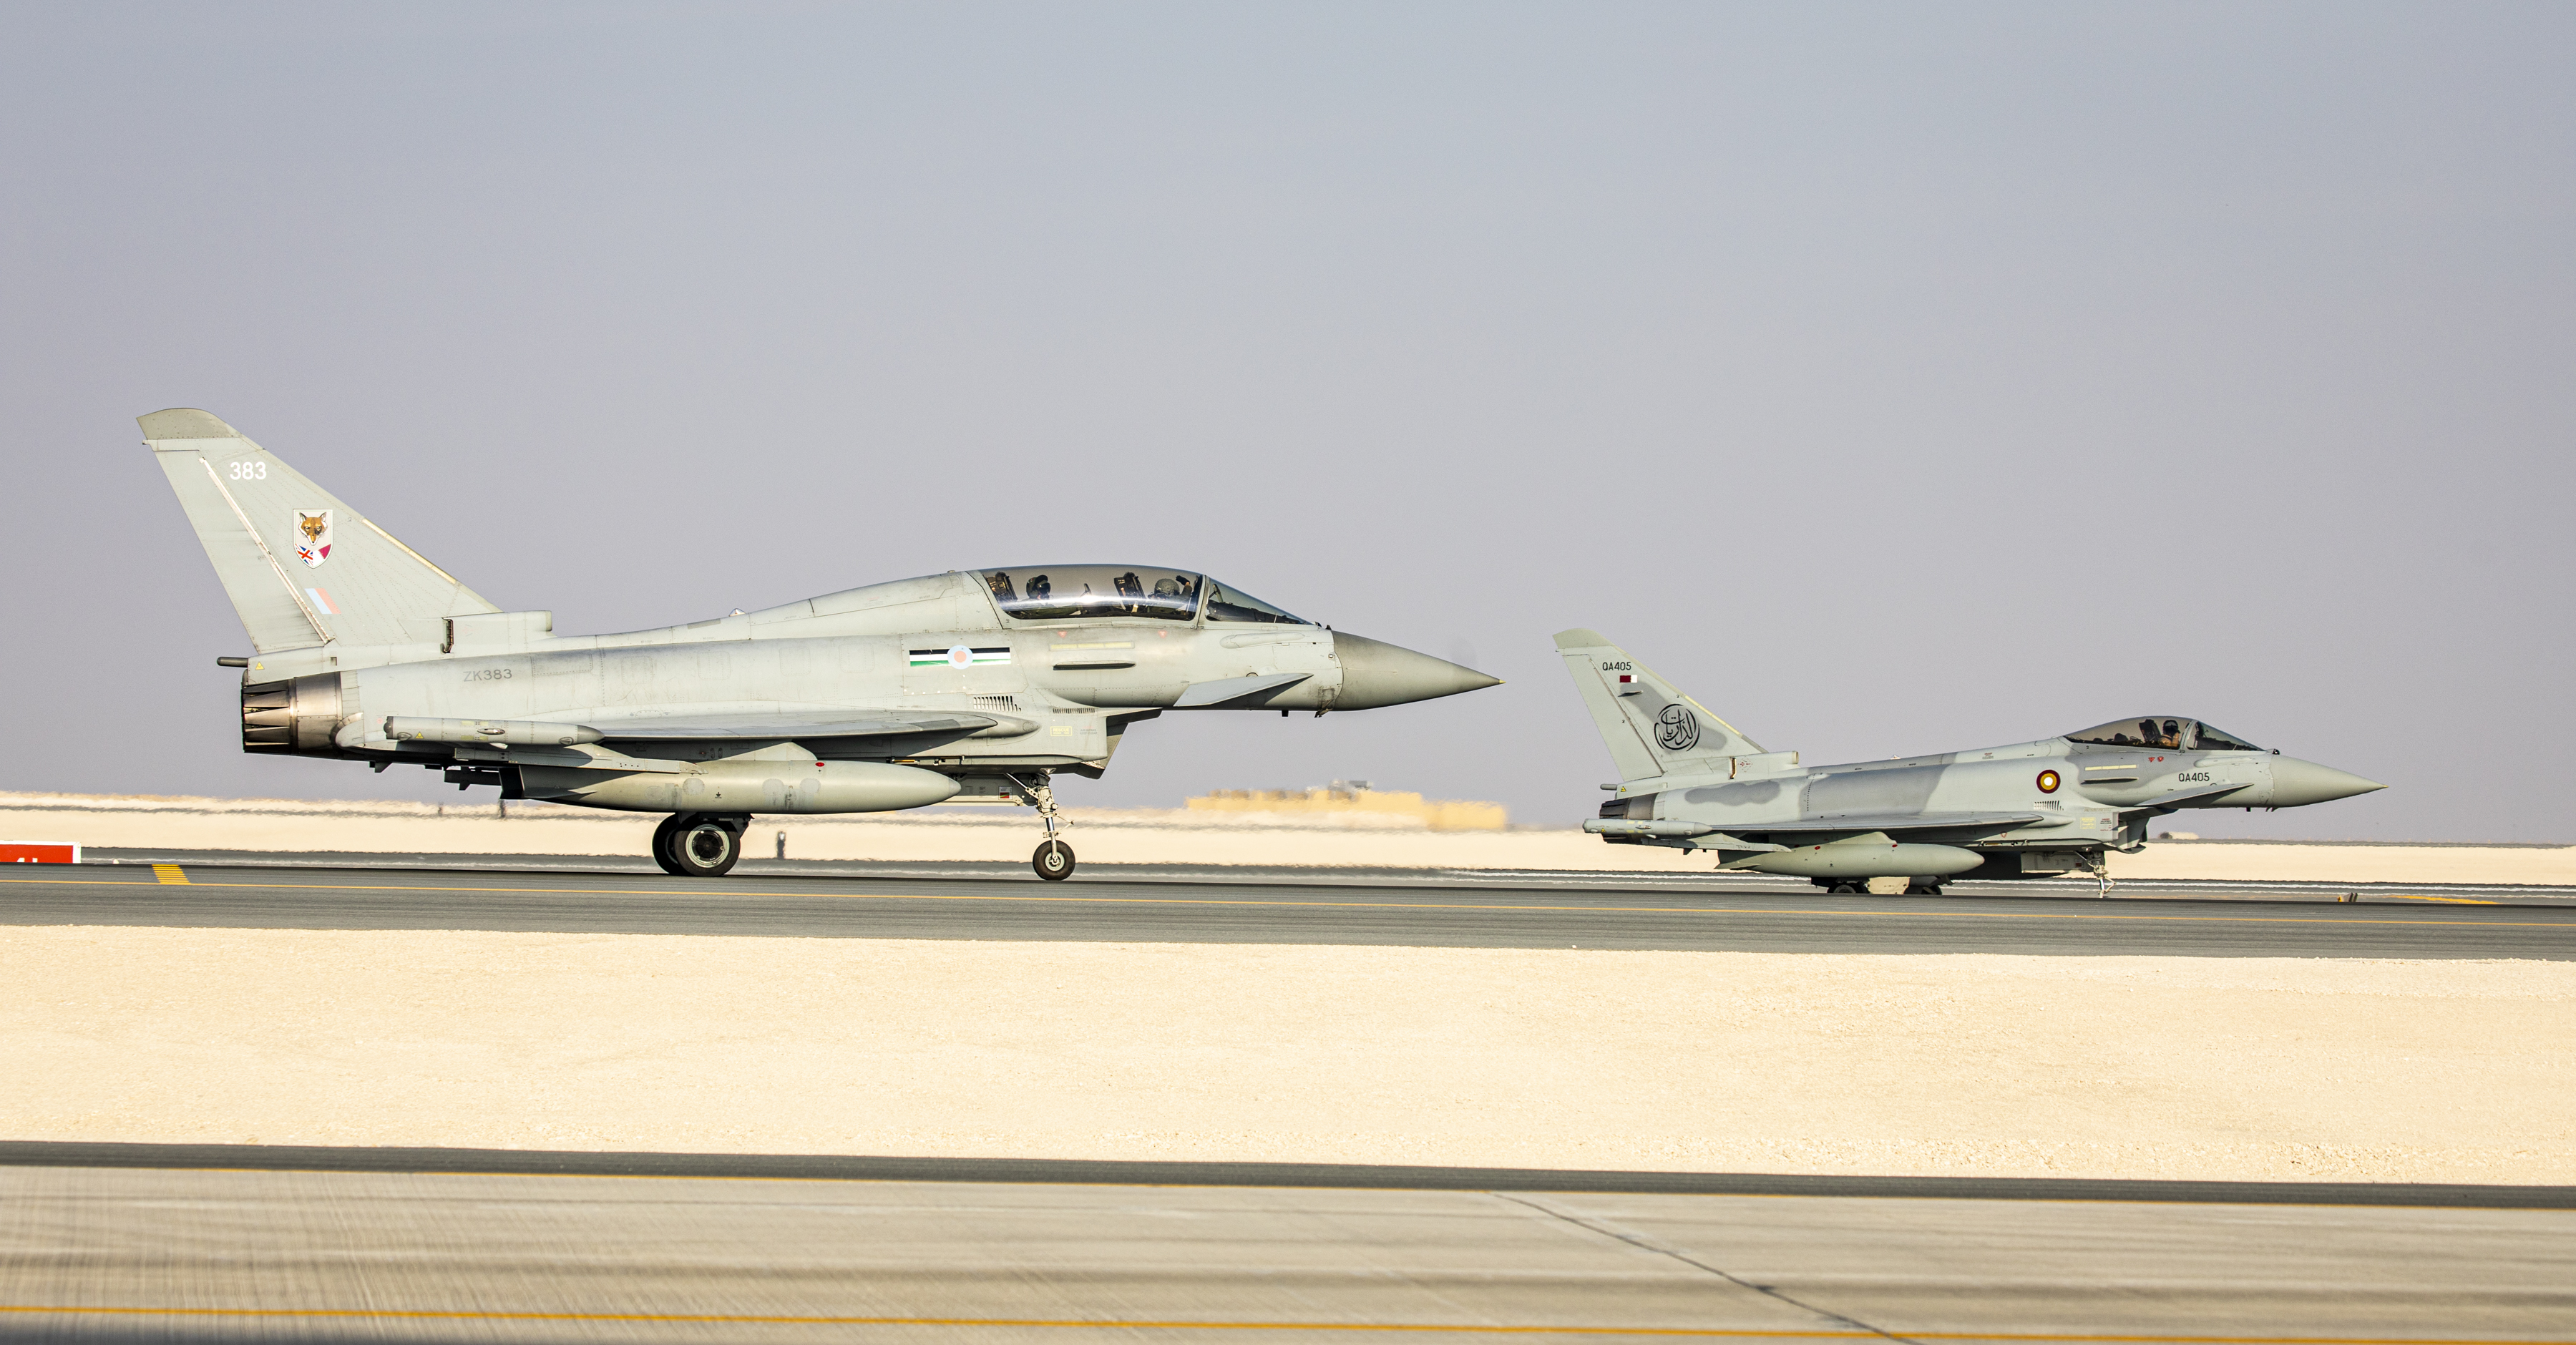 Image shows RAF Typhoons on the runway.